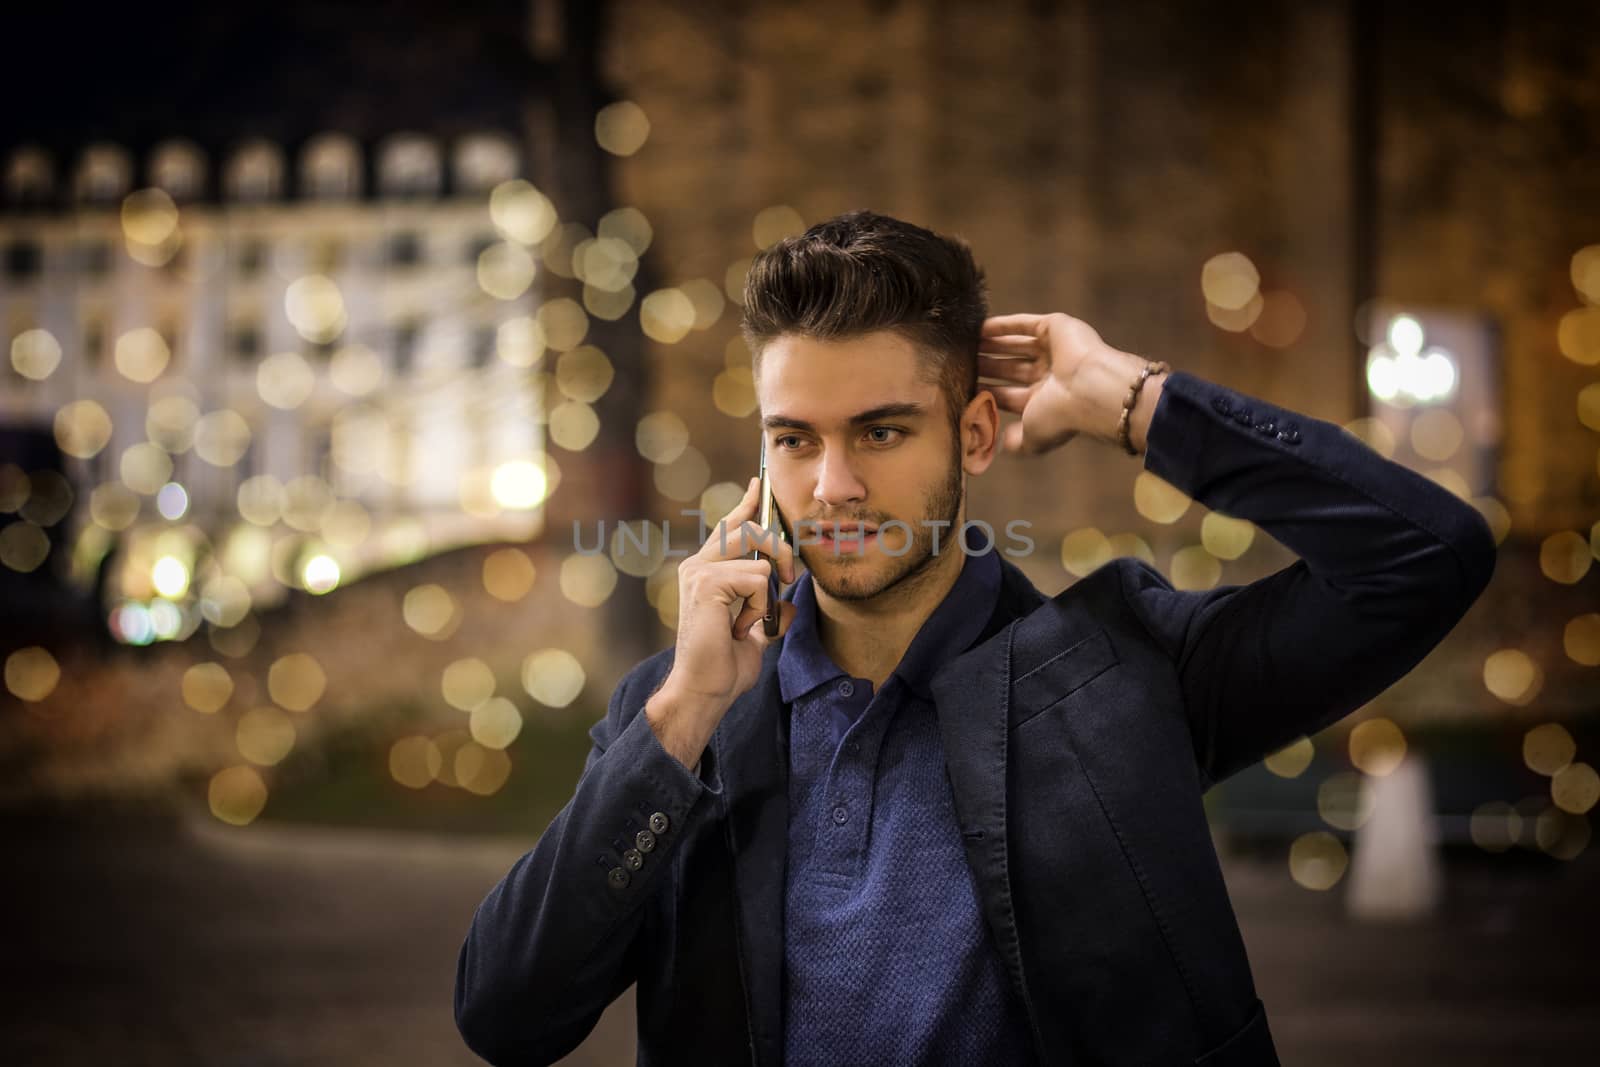 Young man on the phone at night with city lights by artofphoto